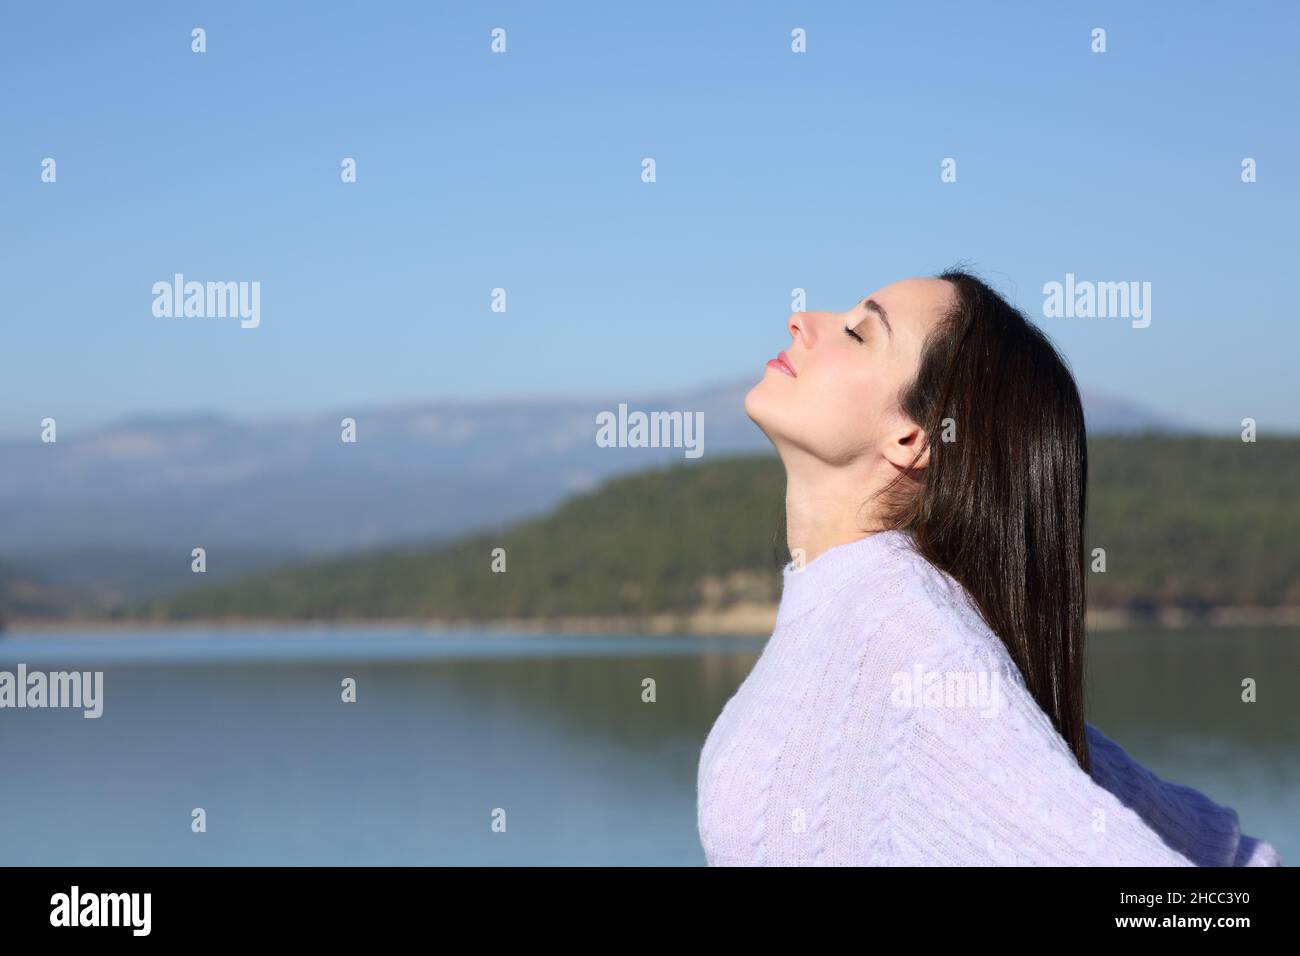 Side view portrait of a relaxed woman breathing fresh air in a mountain lake Stock Photo